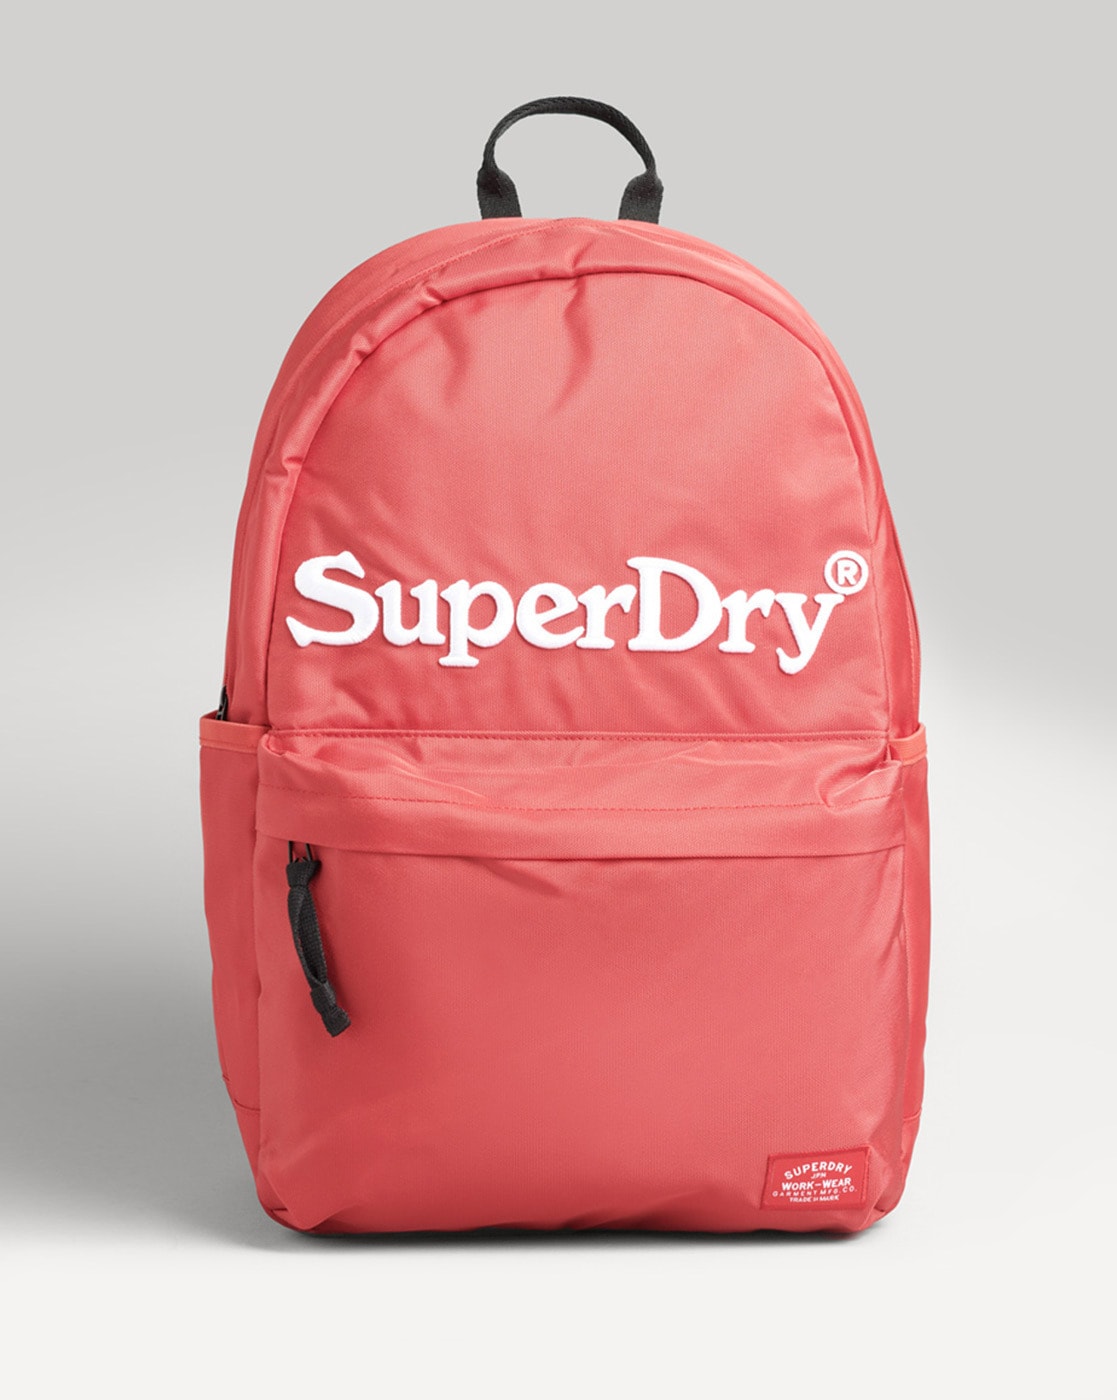 Superdry Classic Montana Backpack | Superdry Bags | Urban Surfer